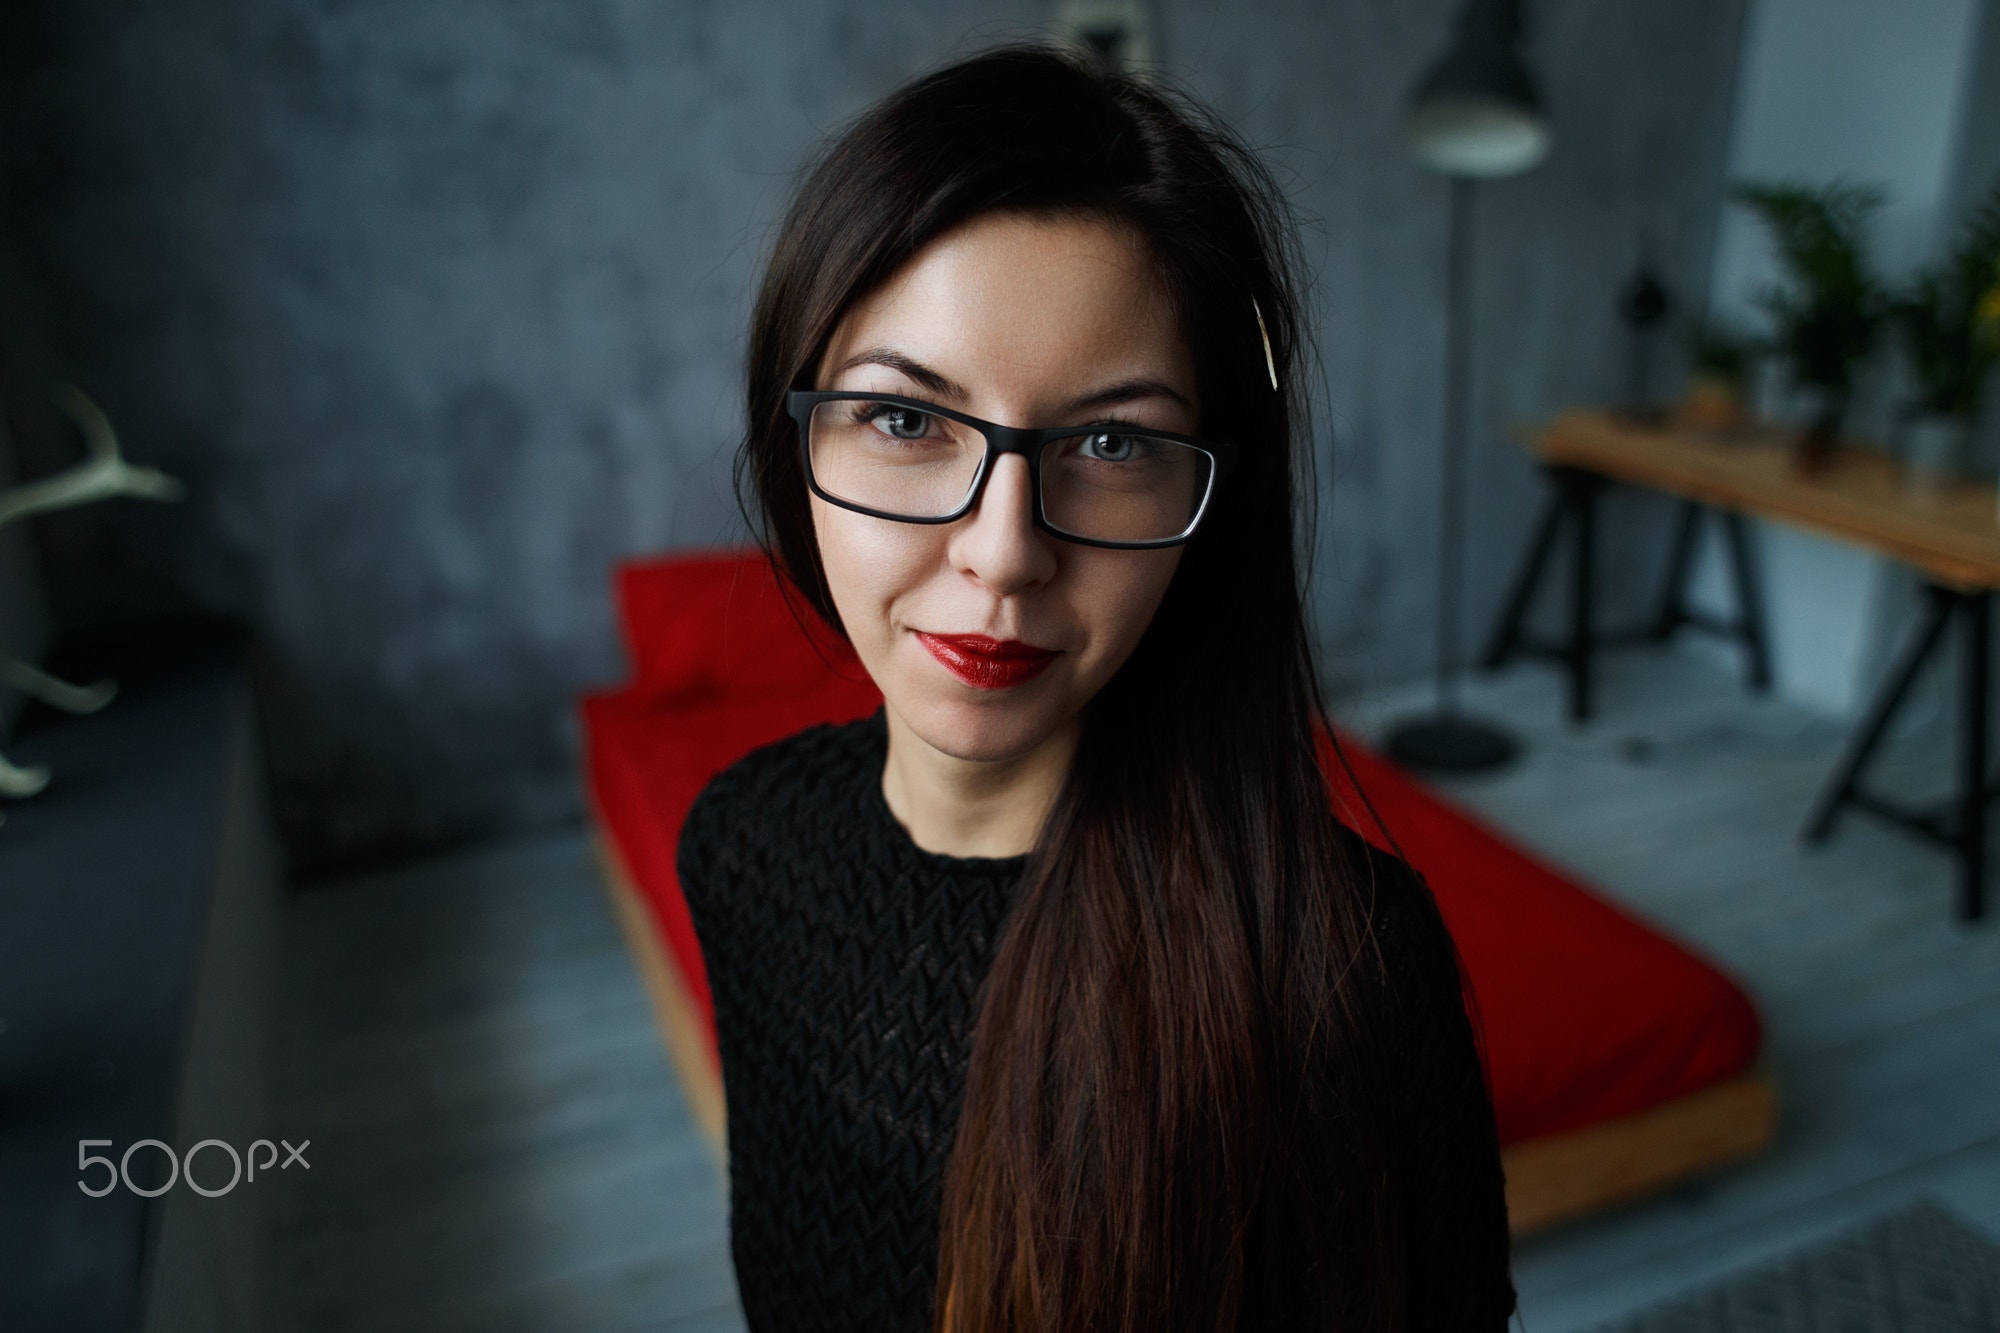 People 2000x1333 women face portrait smiling glasses red lipstick